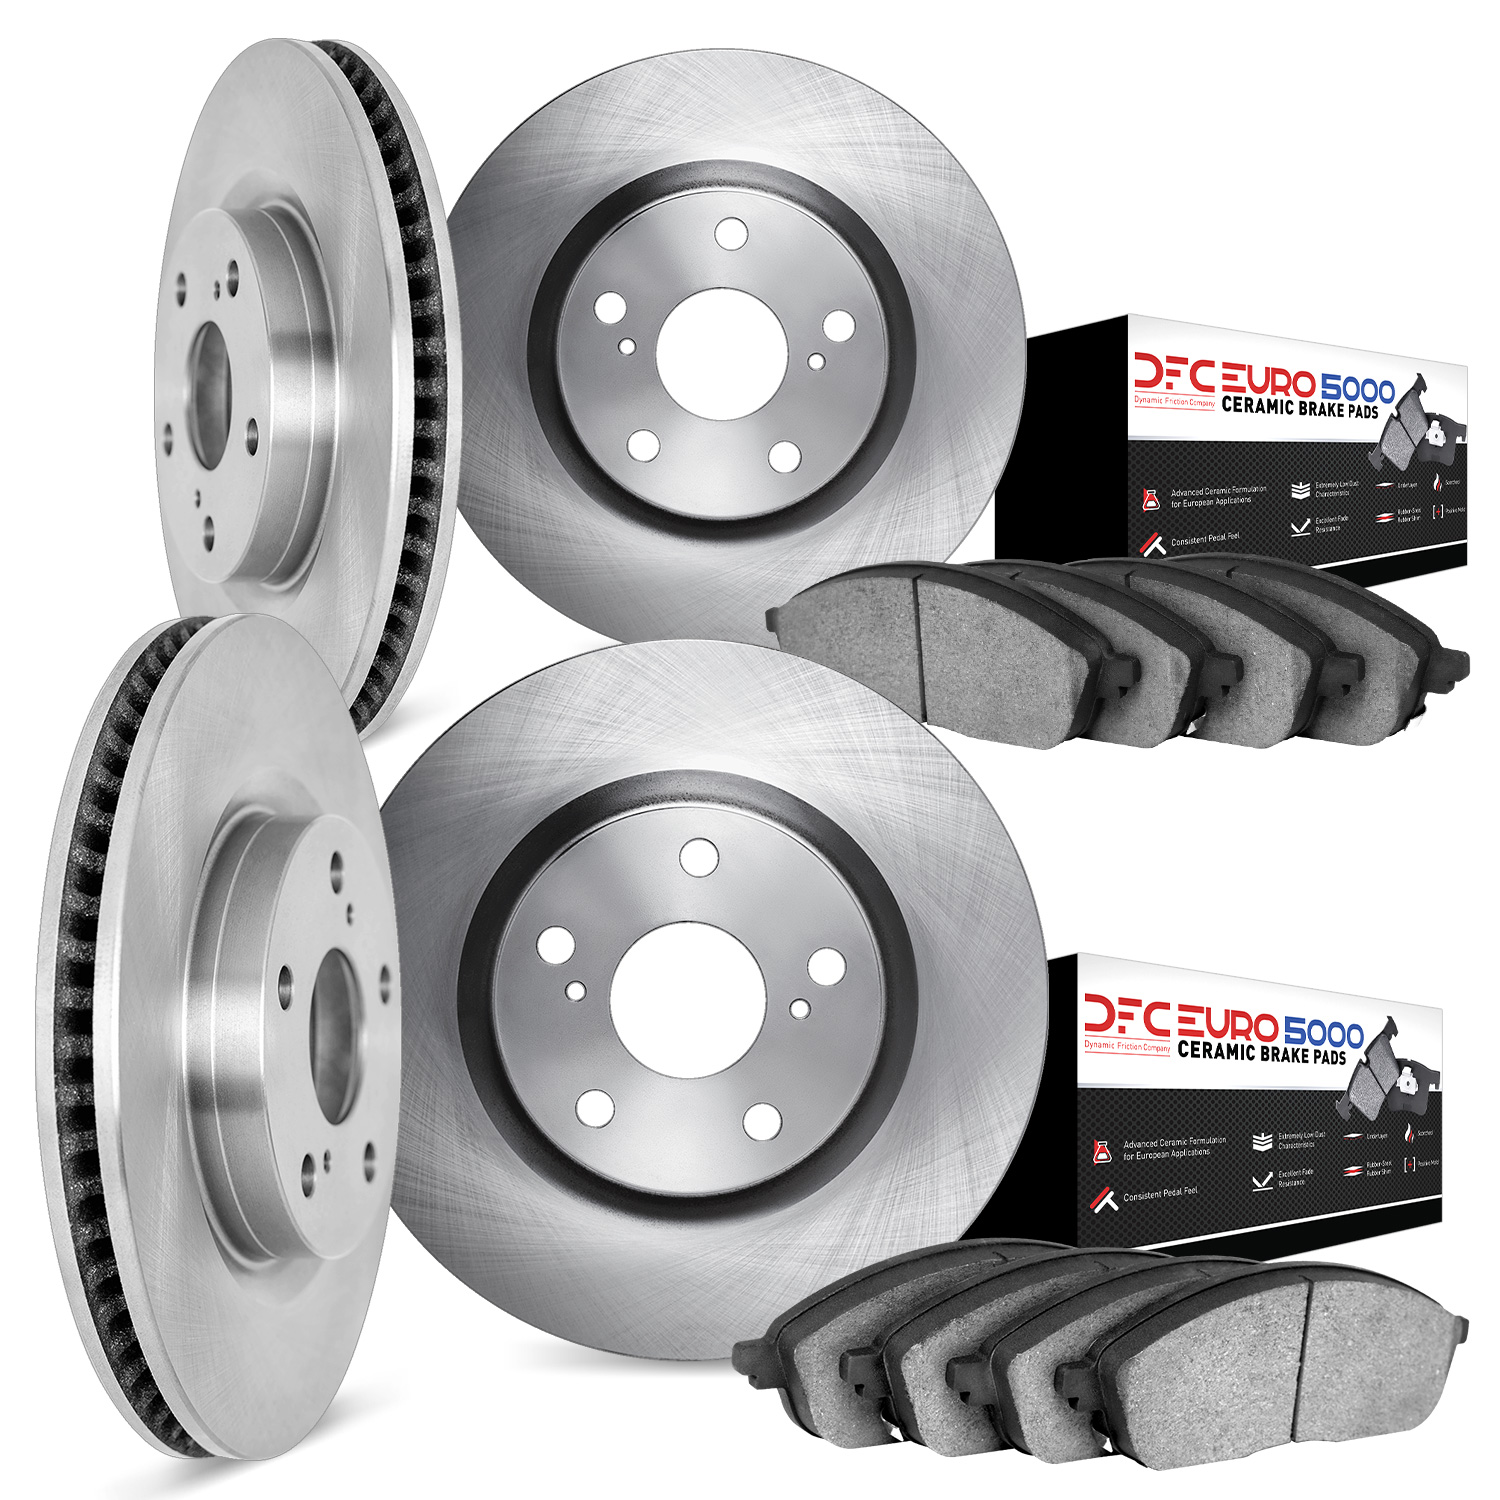 6604-31020 Brake Rotors w/5000 Euro Ceramic Brake Pads, 2004-2010 BMW, Position: Front and Rear